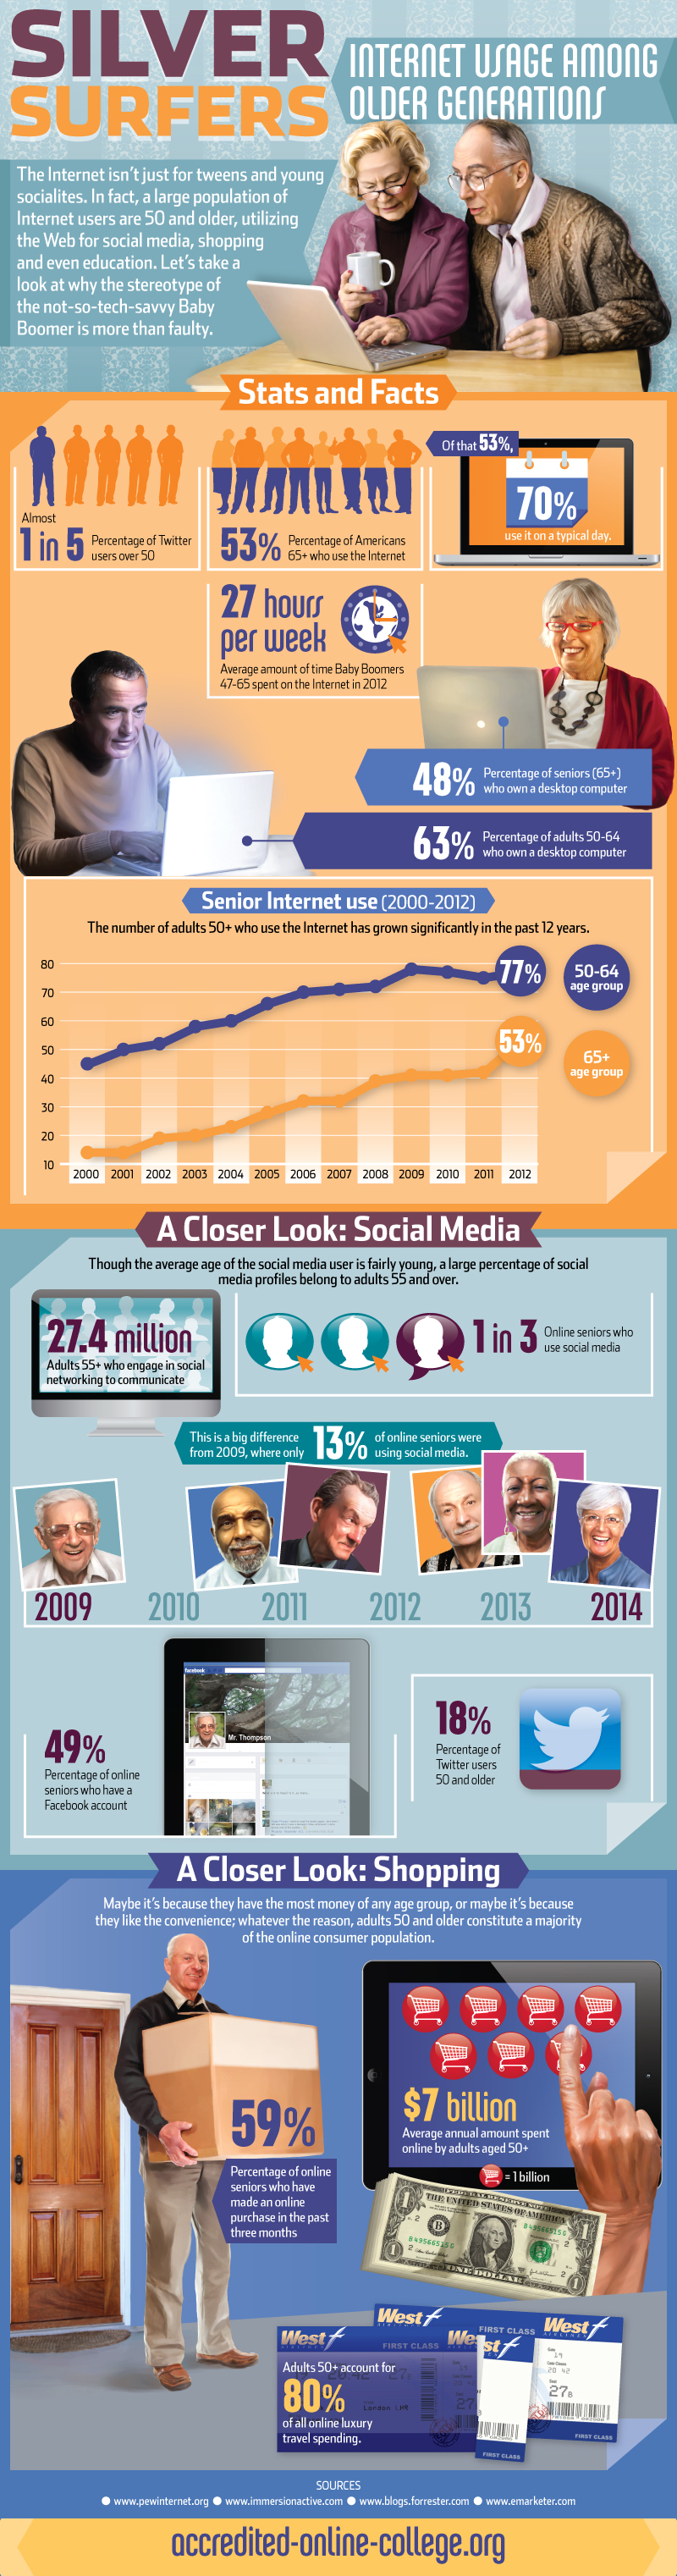 How This Site Blew the Lid Off the Silver Surfer Myth: Internet Use by Older Adults